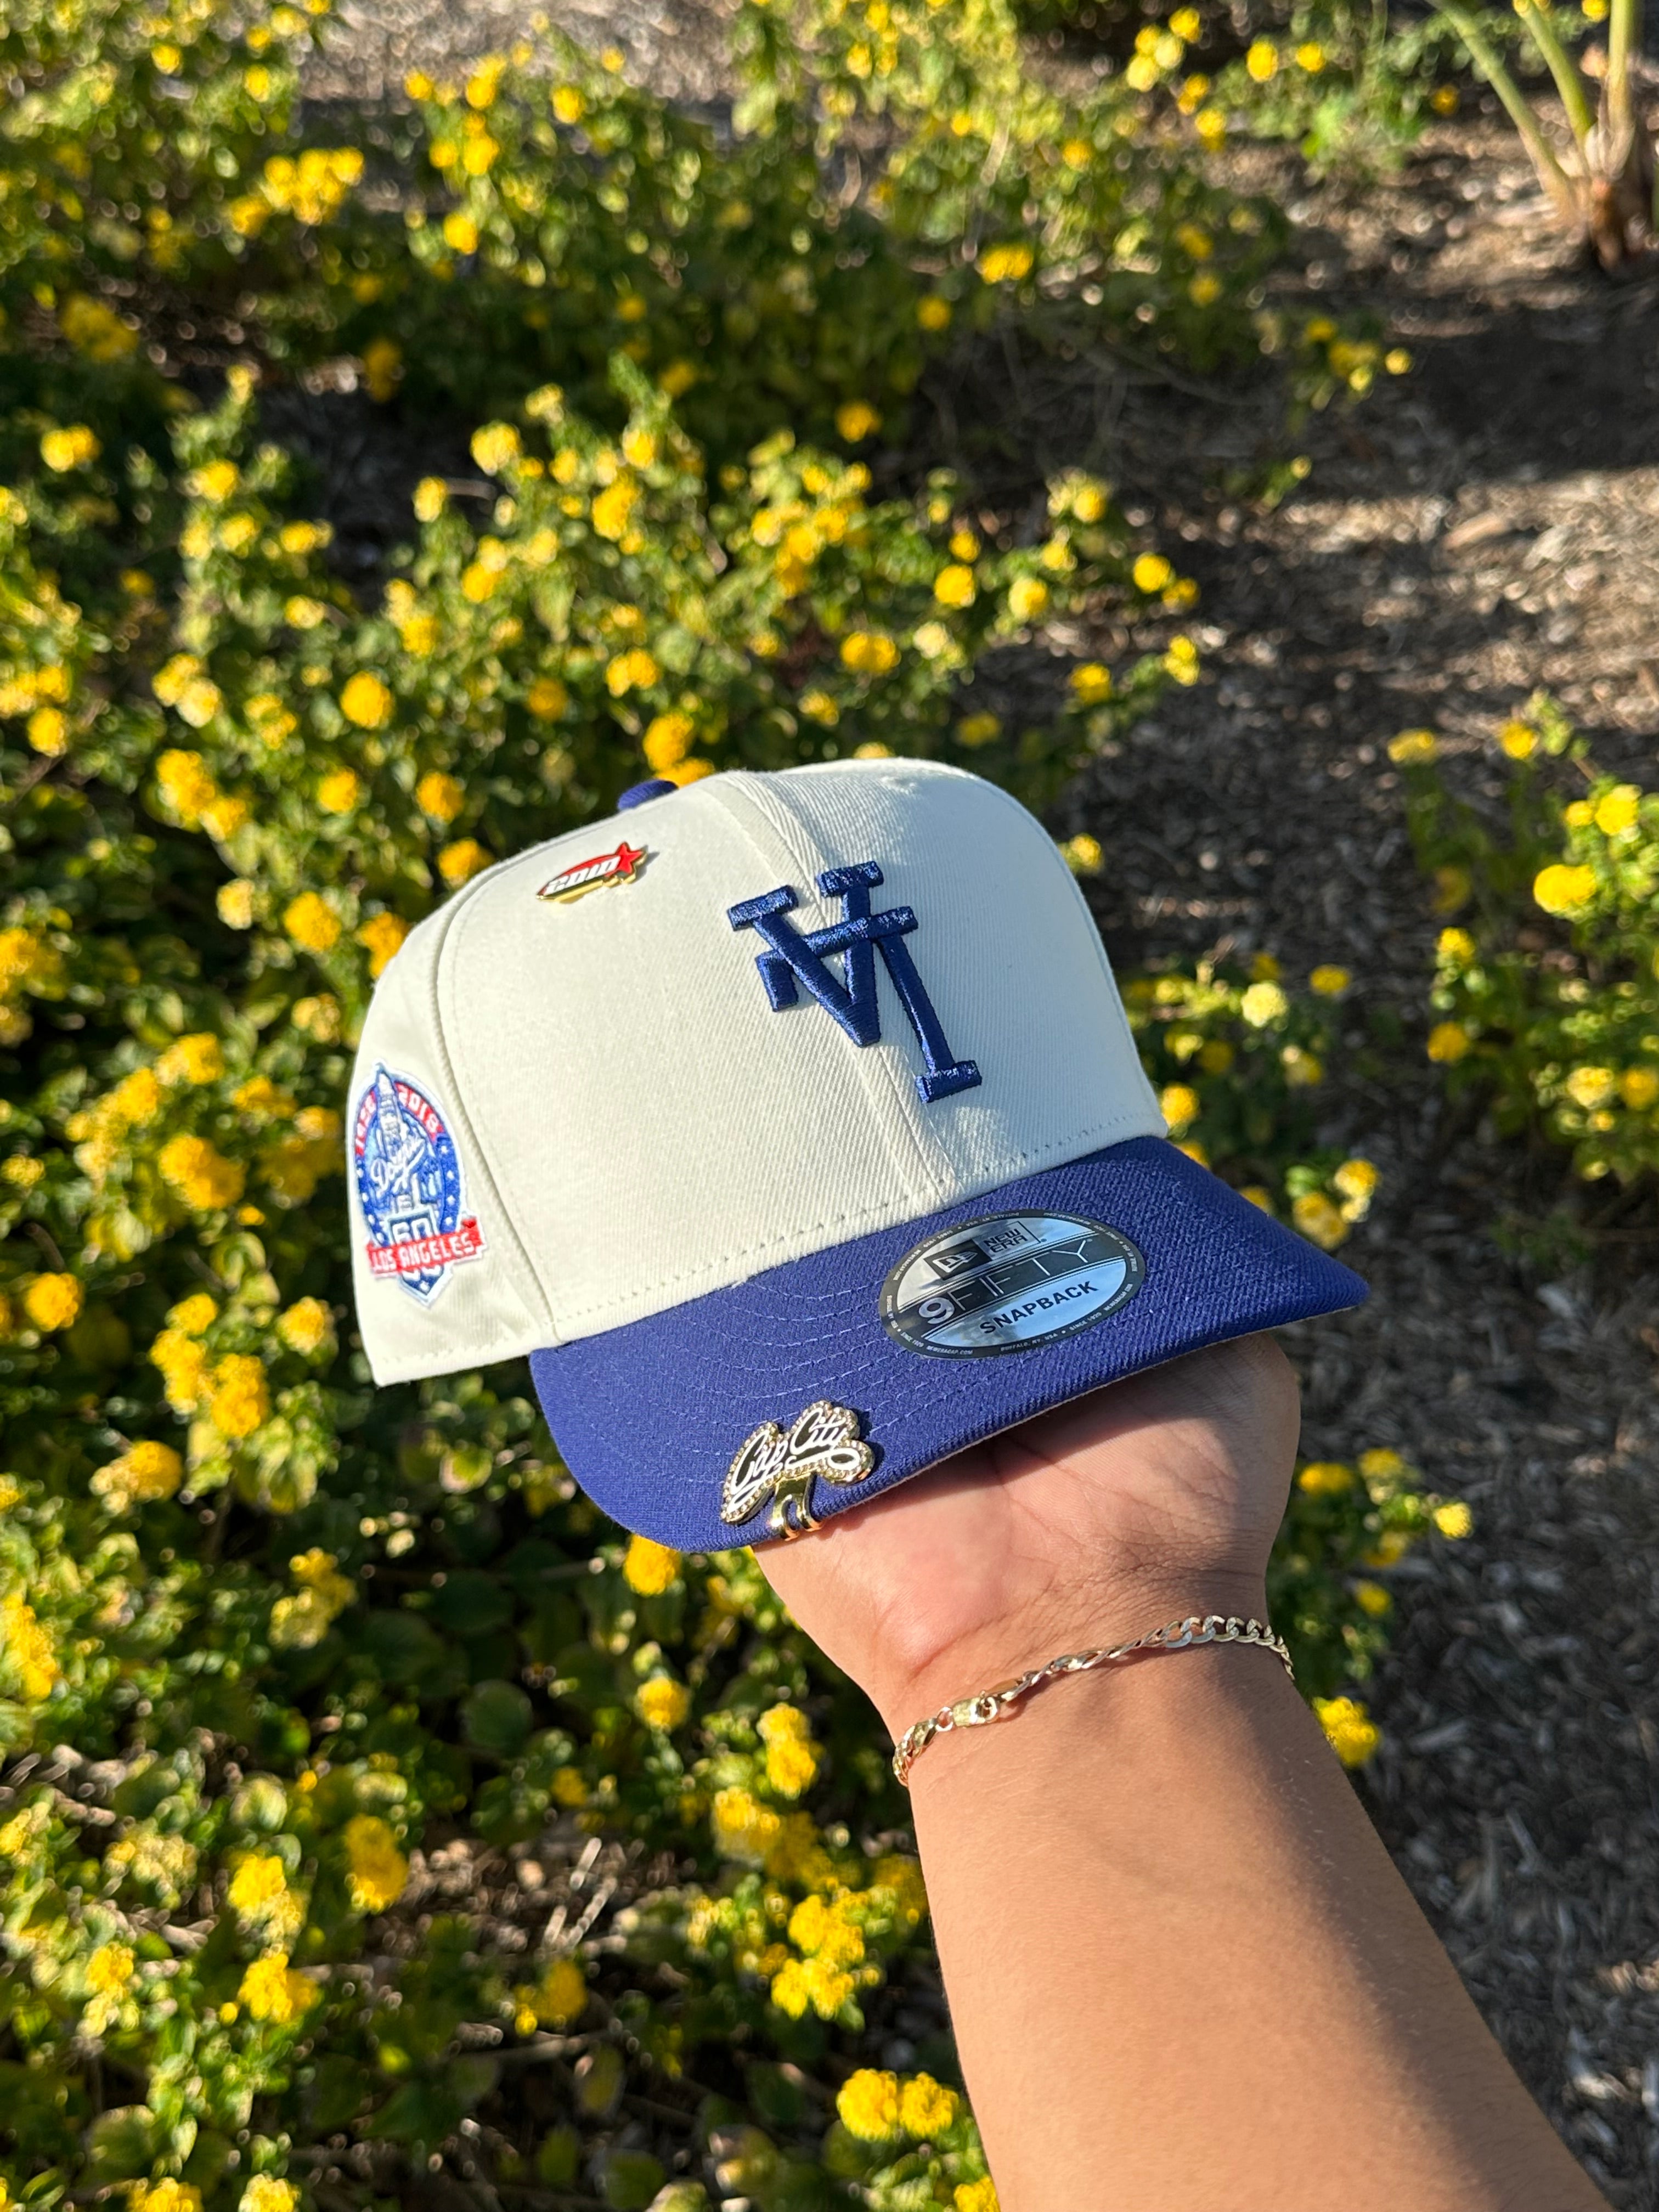 NEW ERA EXCLUSIVE 9FIFTY CHROME WHITE/BLUE UPSIDE DOWN LOS ANGELES DODGERS SNAPBACK W/ 60TH ANNIVERSARY PATCH